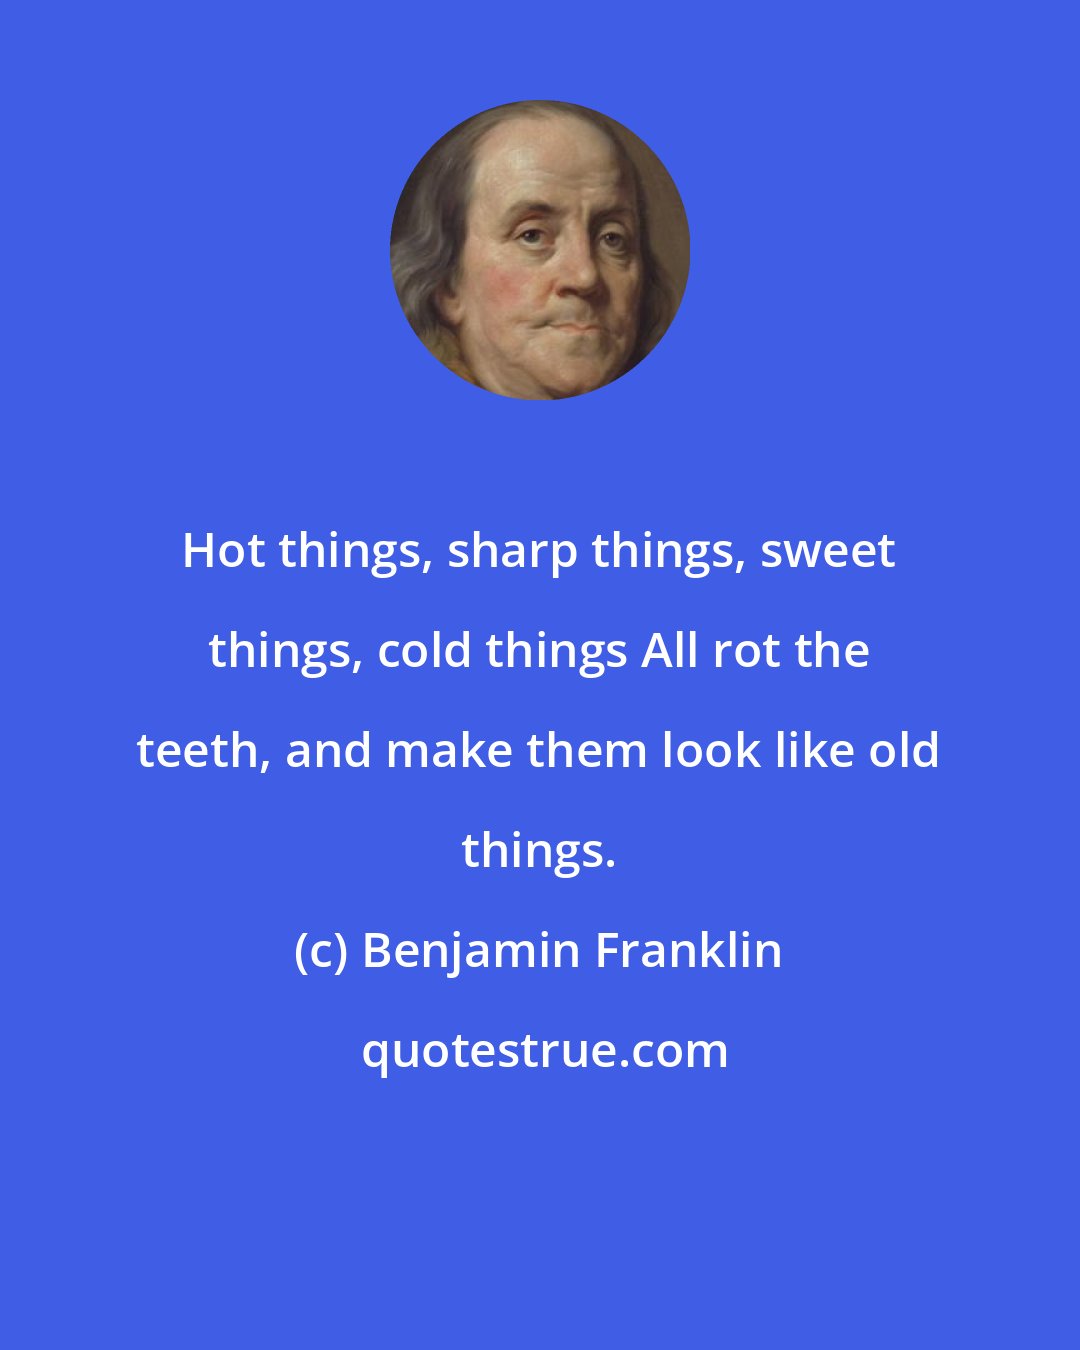 Benjamin Franklin: Hot things, sharp things, sweet things, cold things All rot the teeth, and make them look like old things.